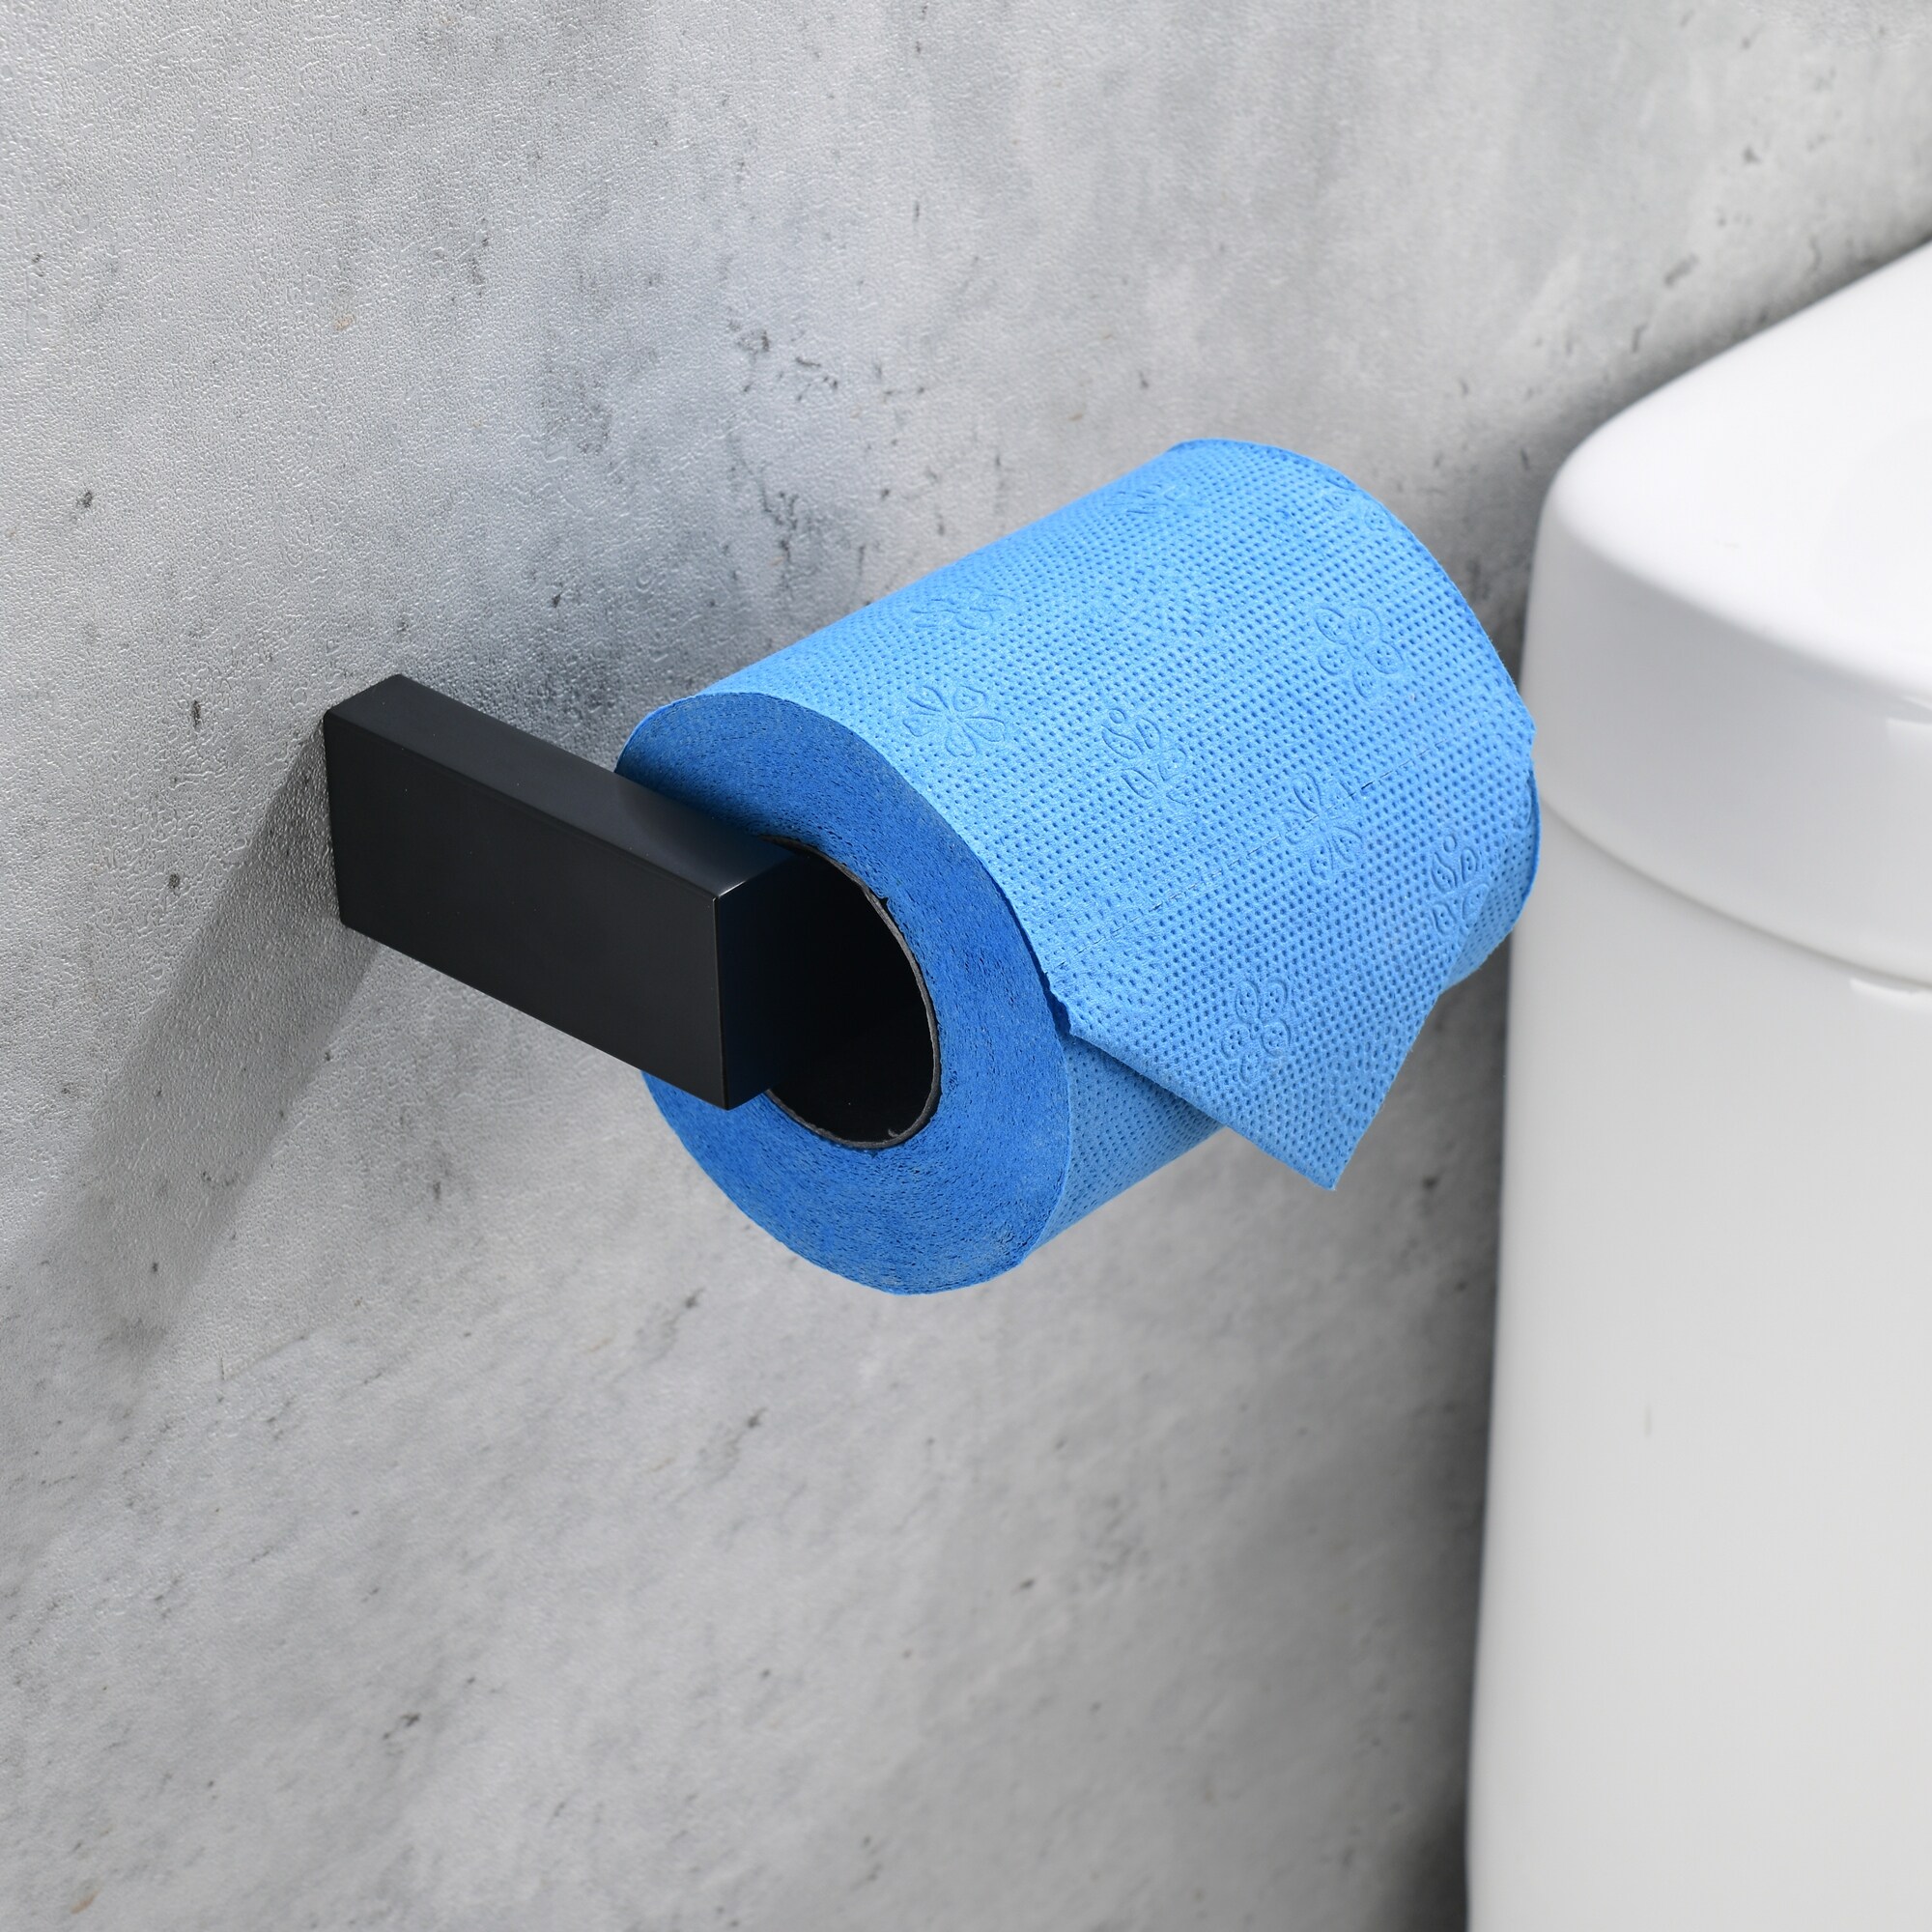 https://ak1.ostkcdn.com/images/products/is/images/direct/96d3845d735f69534e32e392808f3d8aaaa6b487/AITINKAN-Toilet-Paper-Holder.jpg